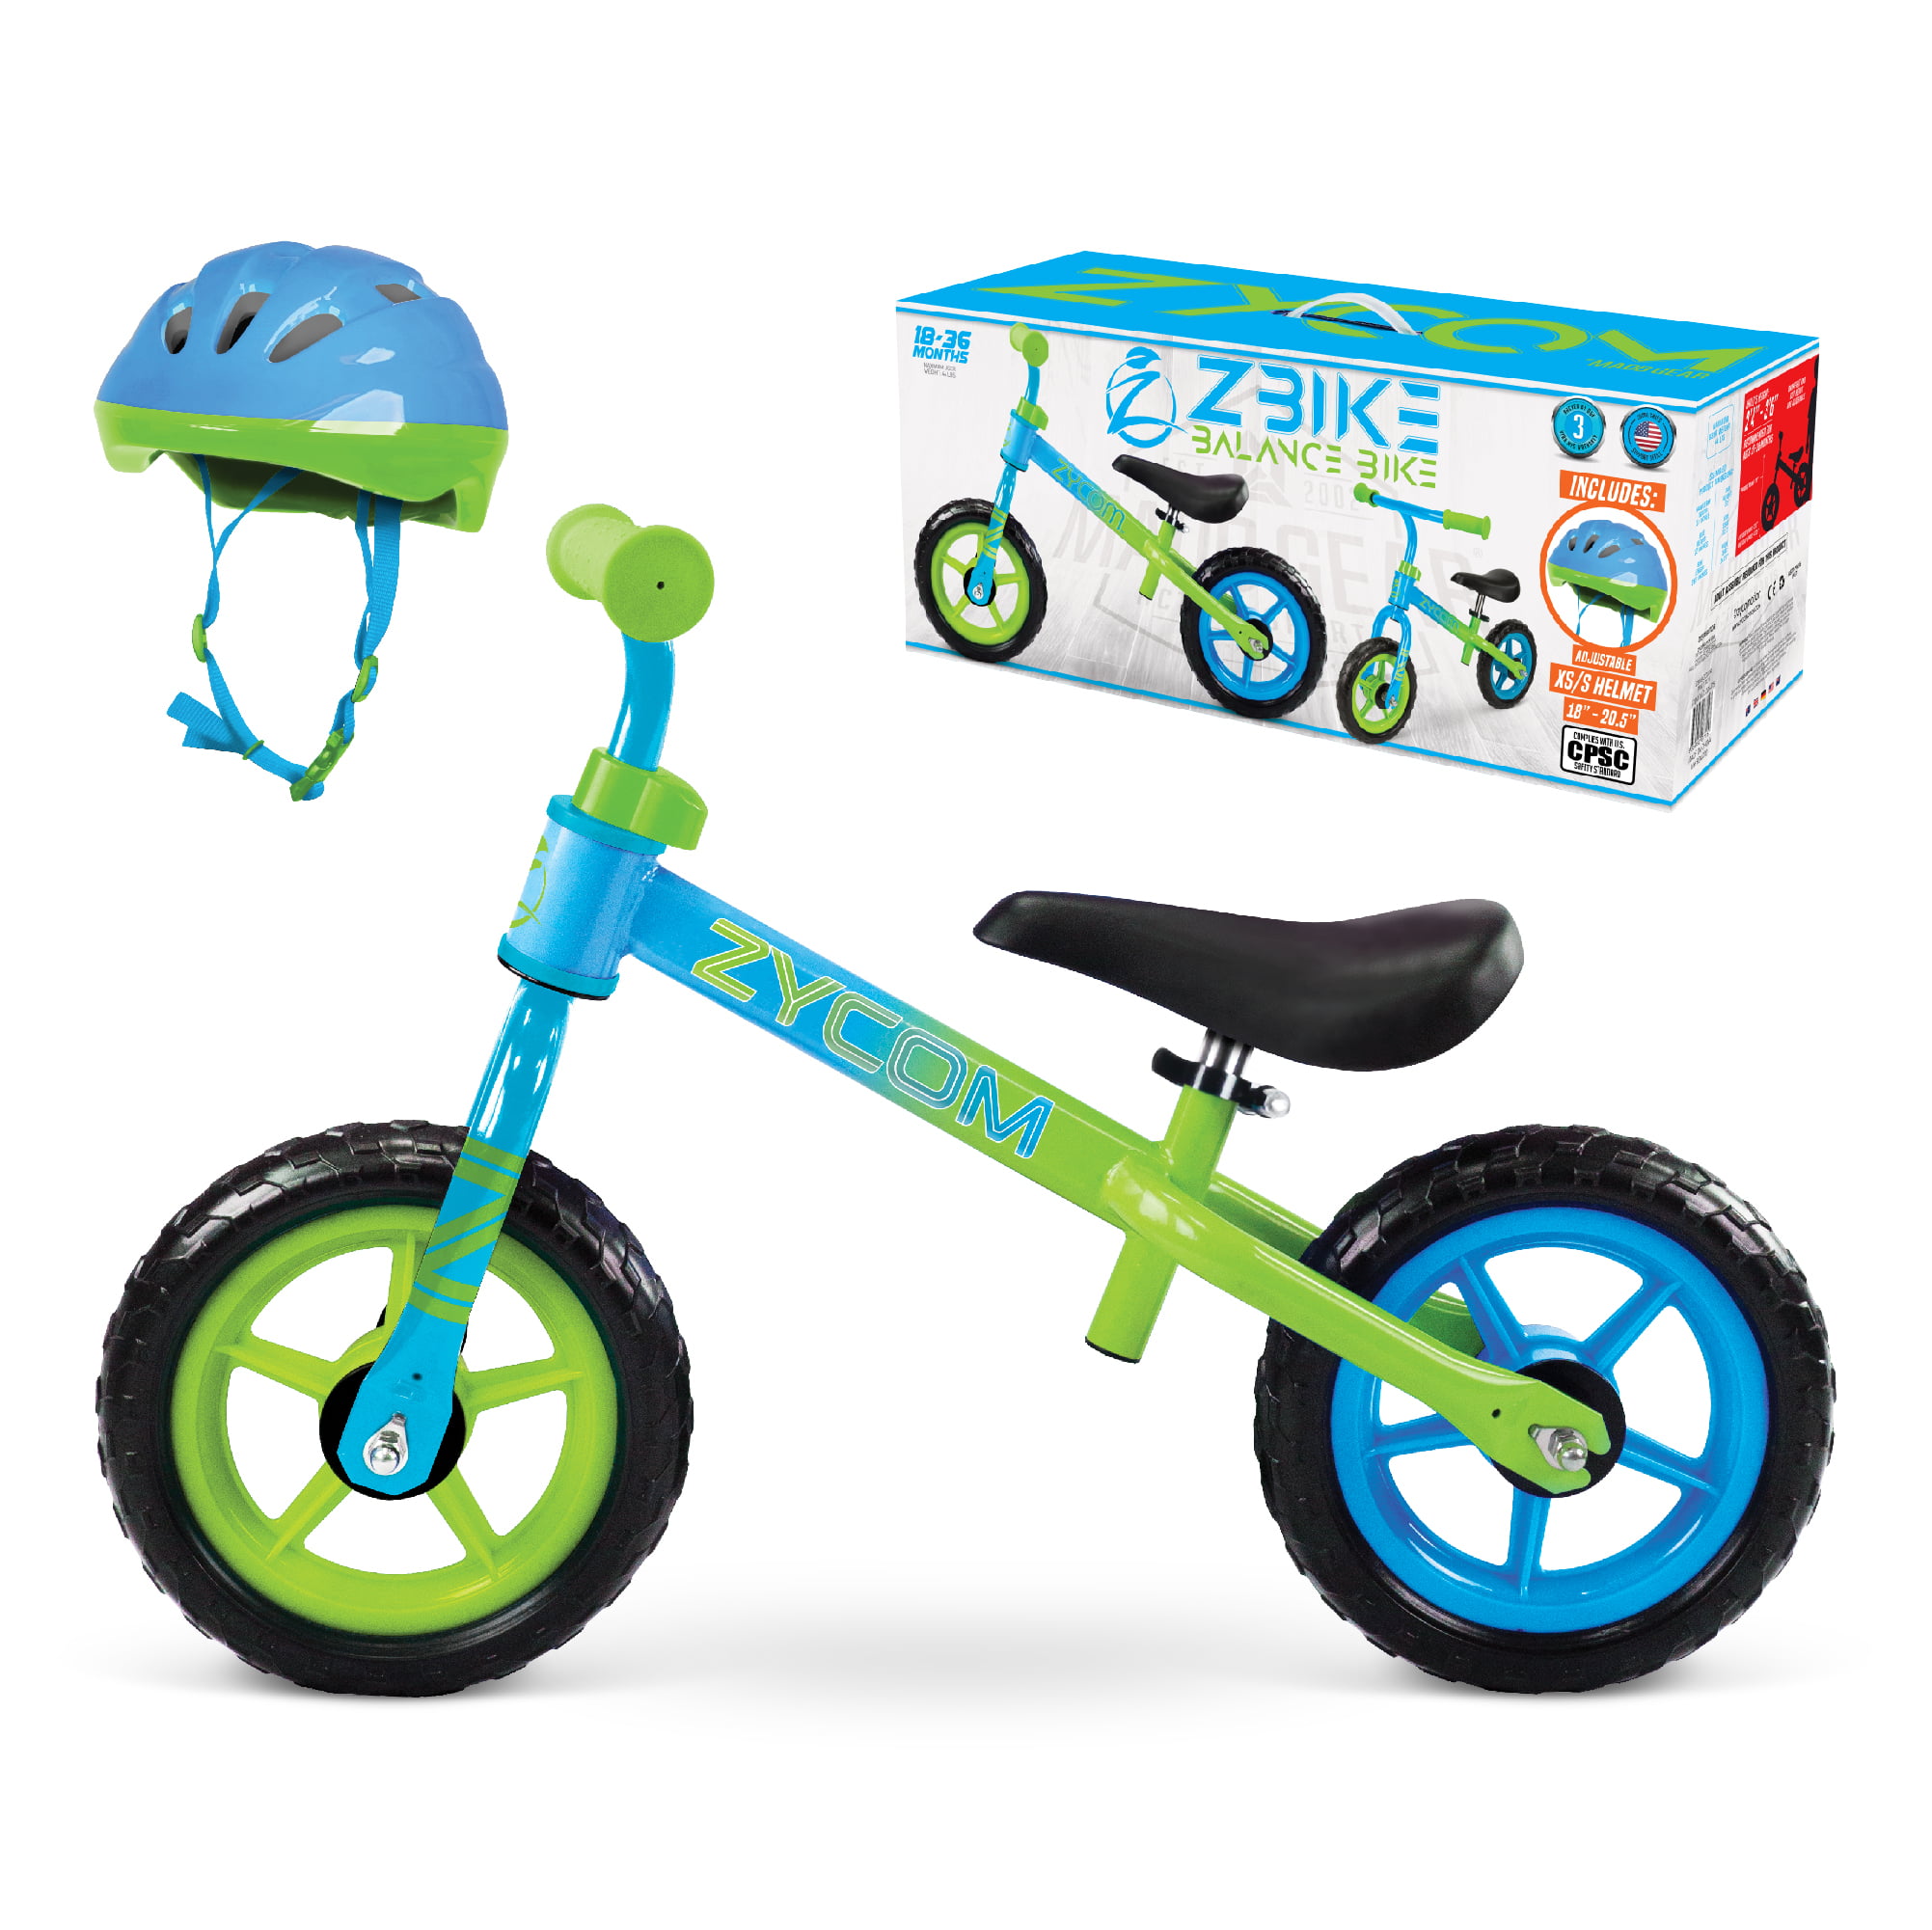 Trackpack Limited RideonToys4u Balance Bike With 12 Inch EVA Wheels and Footrest Blue Ages 2-5 Years